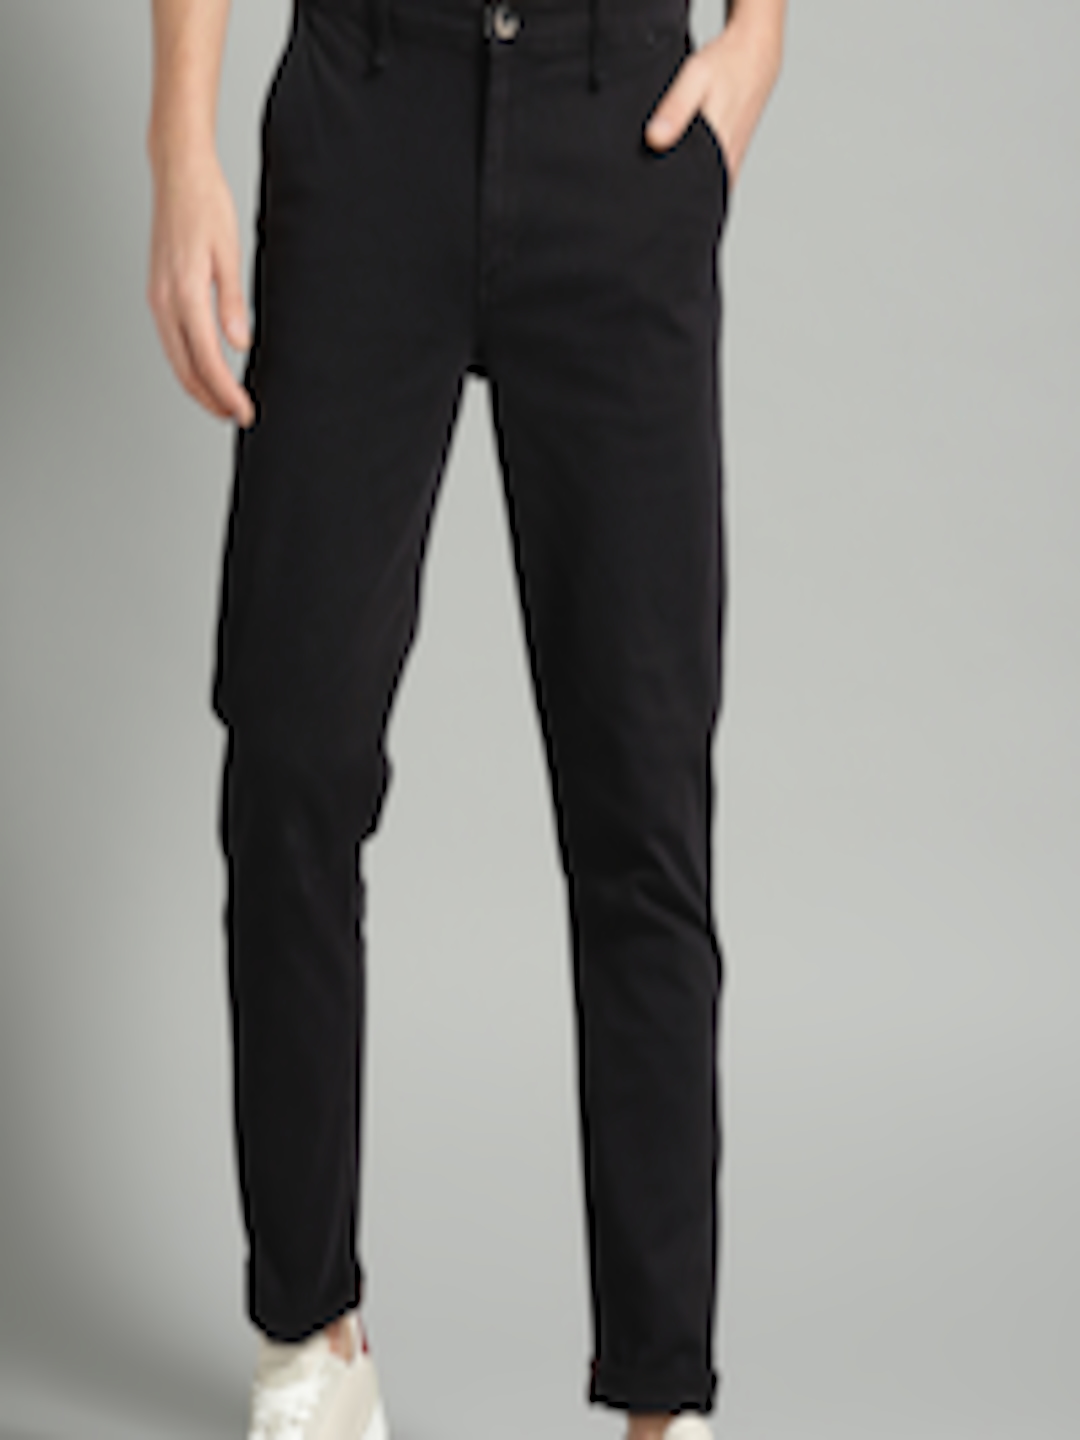 Buy The Roadster Lifestyle Co Men Black Regular Fit Solid Trousers ...